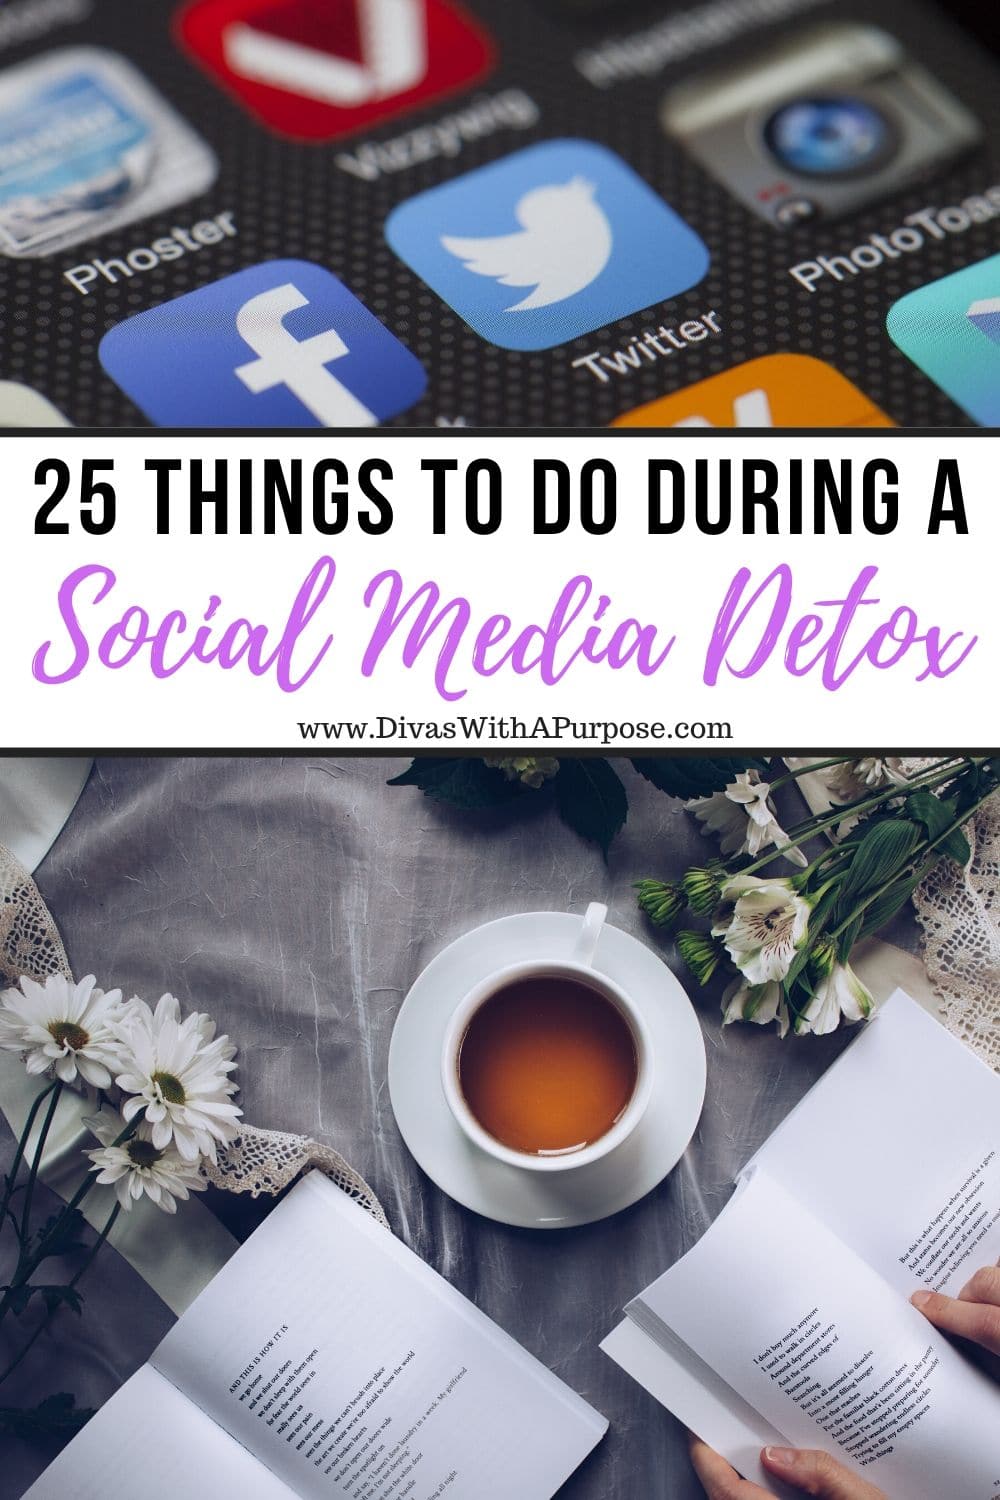 25 Things to Do During a Social Media Detox